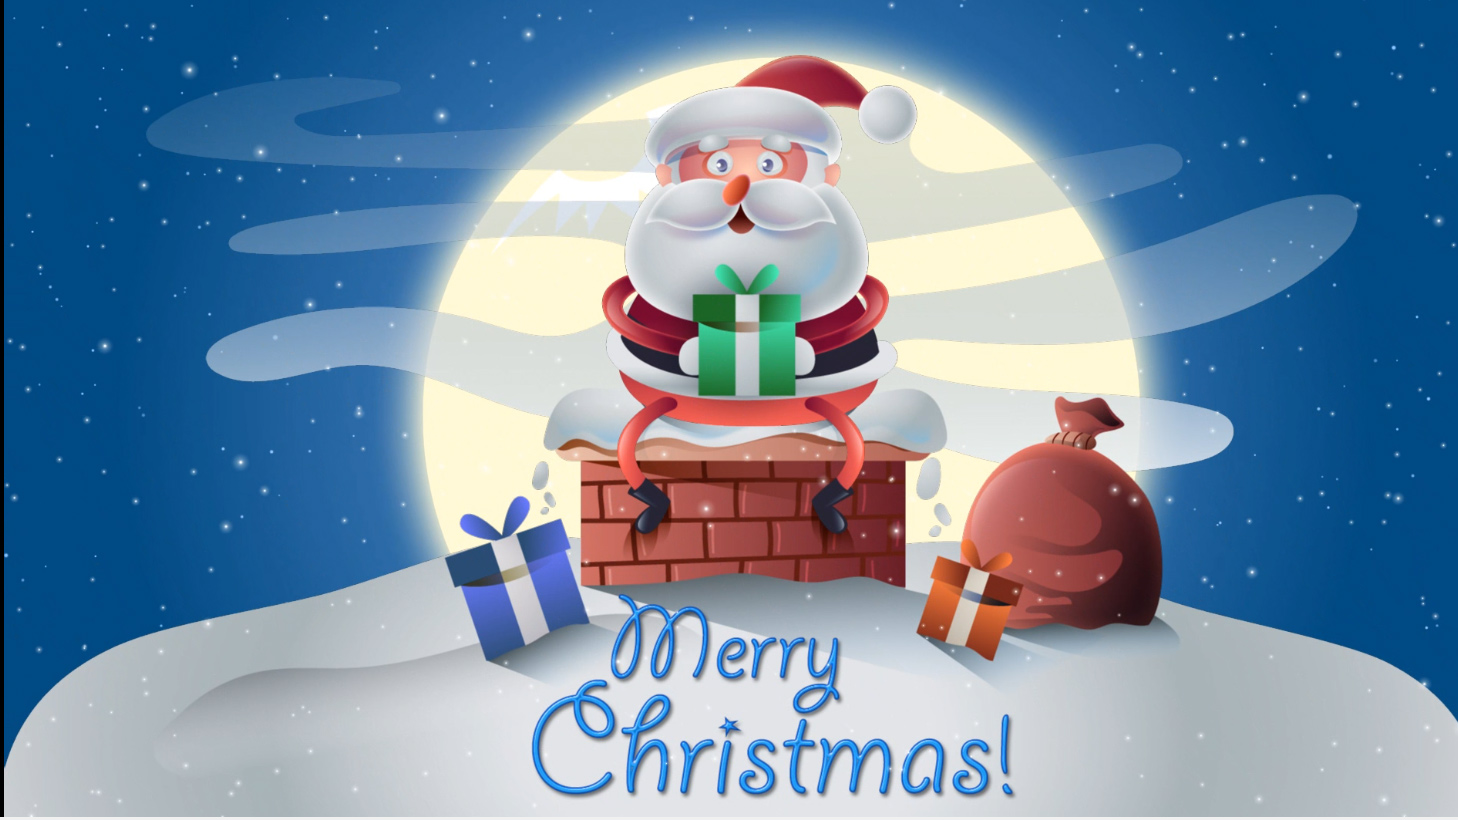 Santa Claus in the Chimney Screensaver - Animated Wallpapers